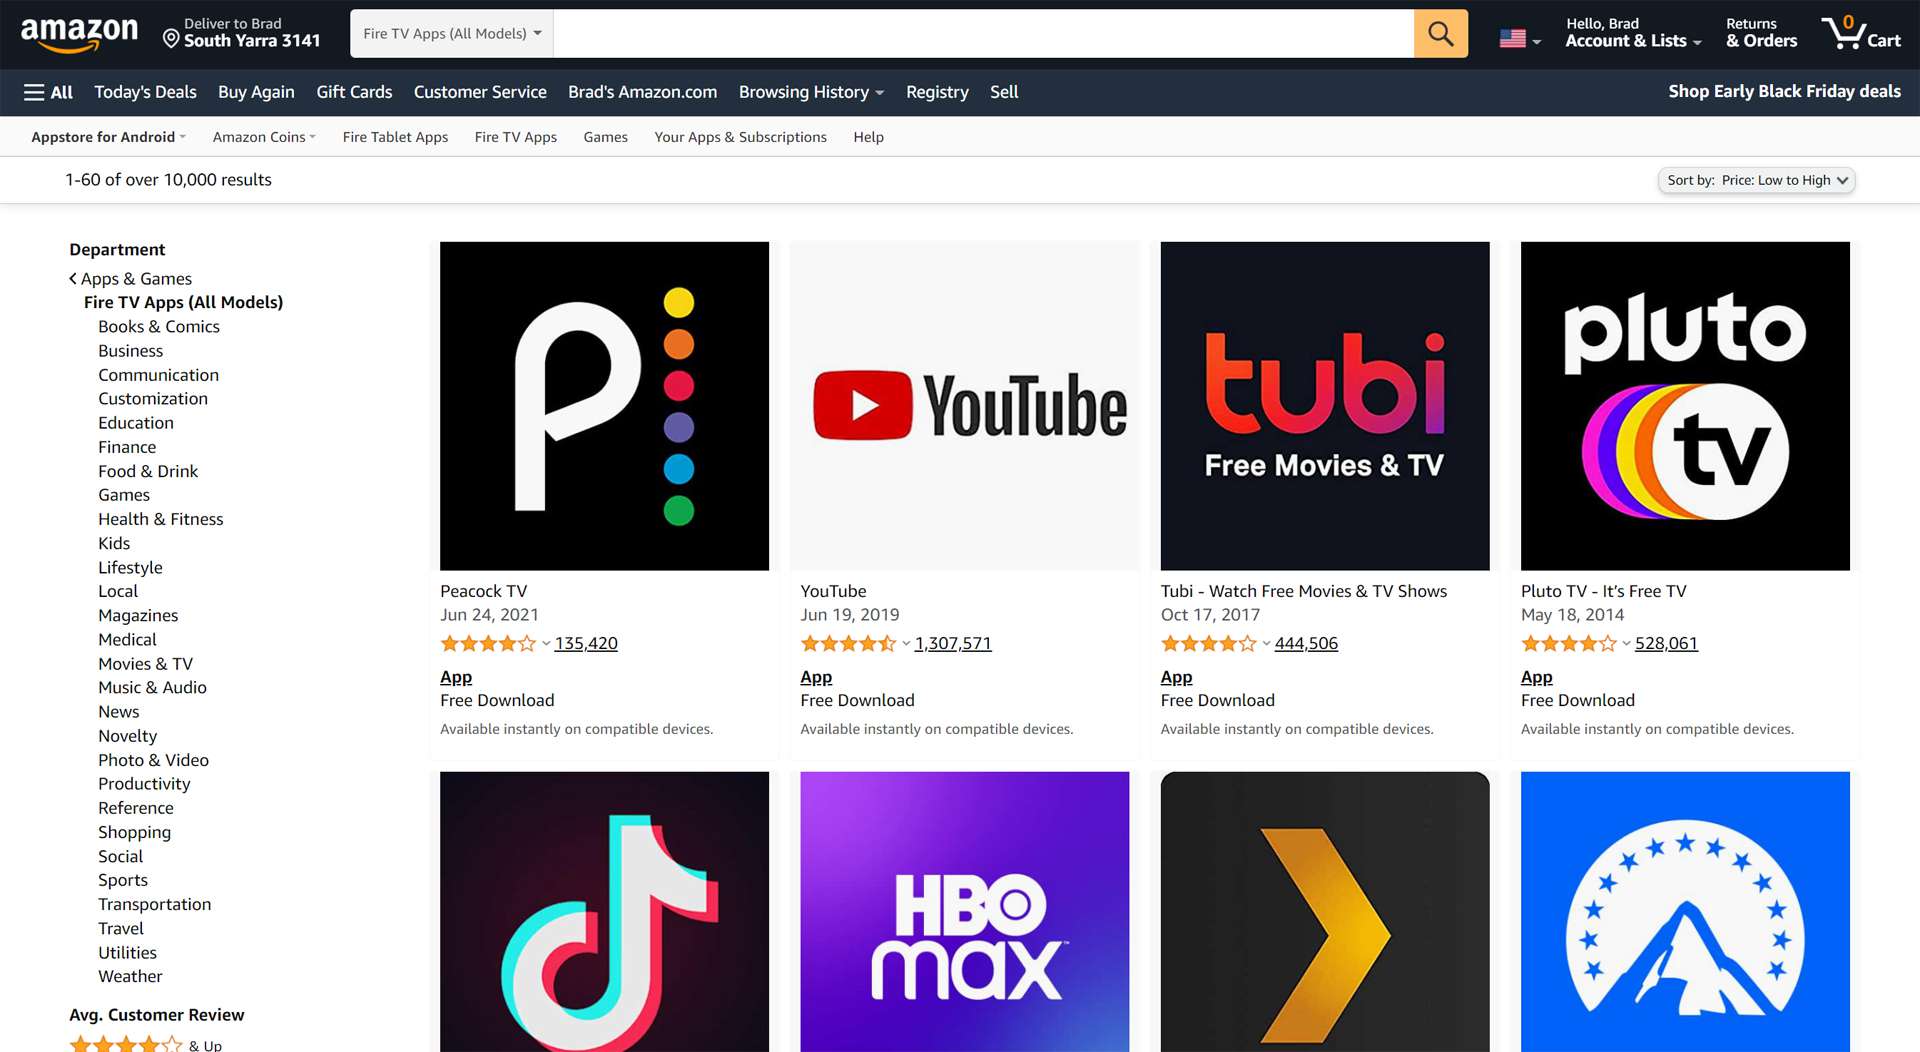 how to download firefox to amazon fire stick